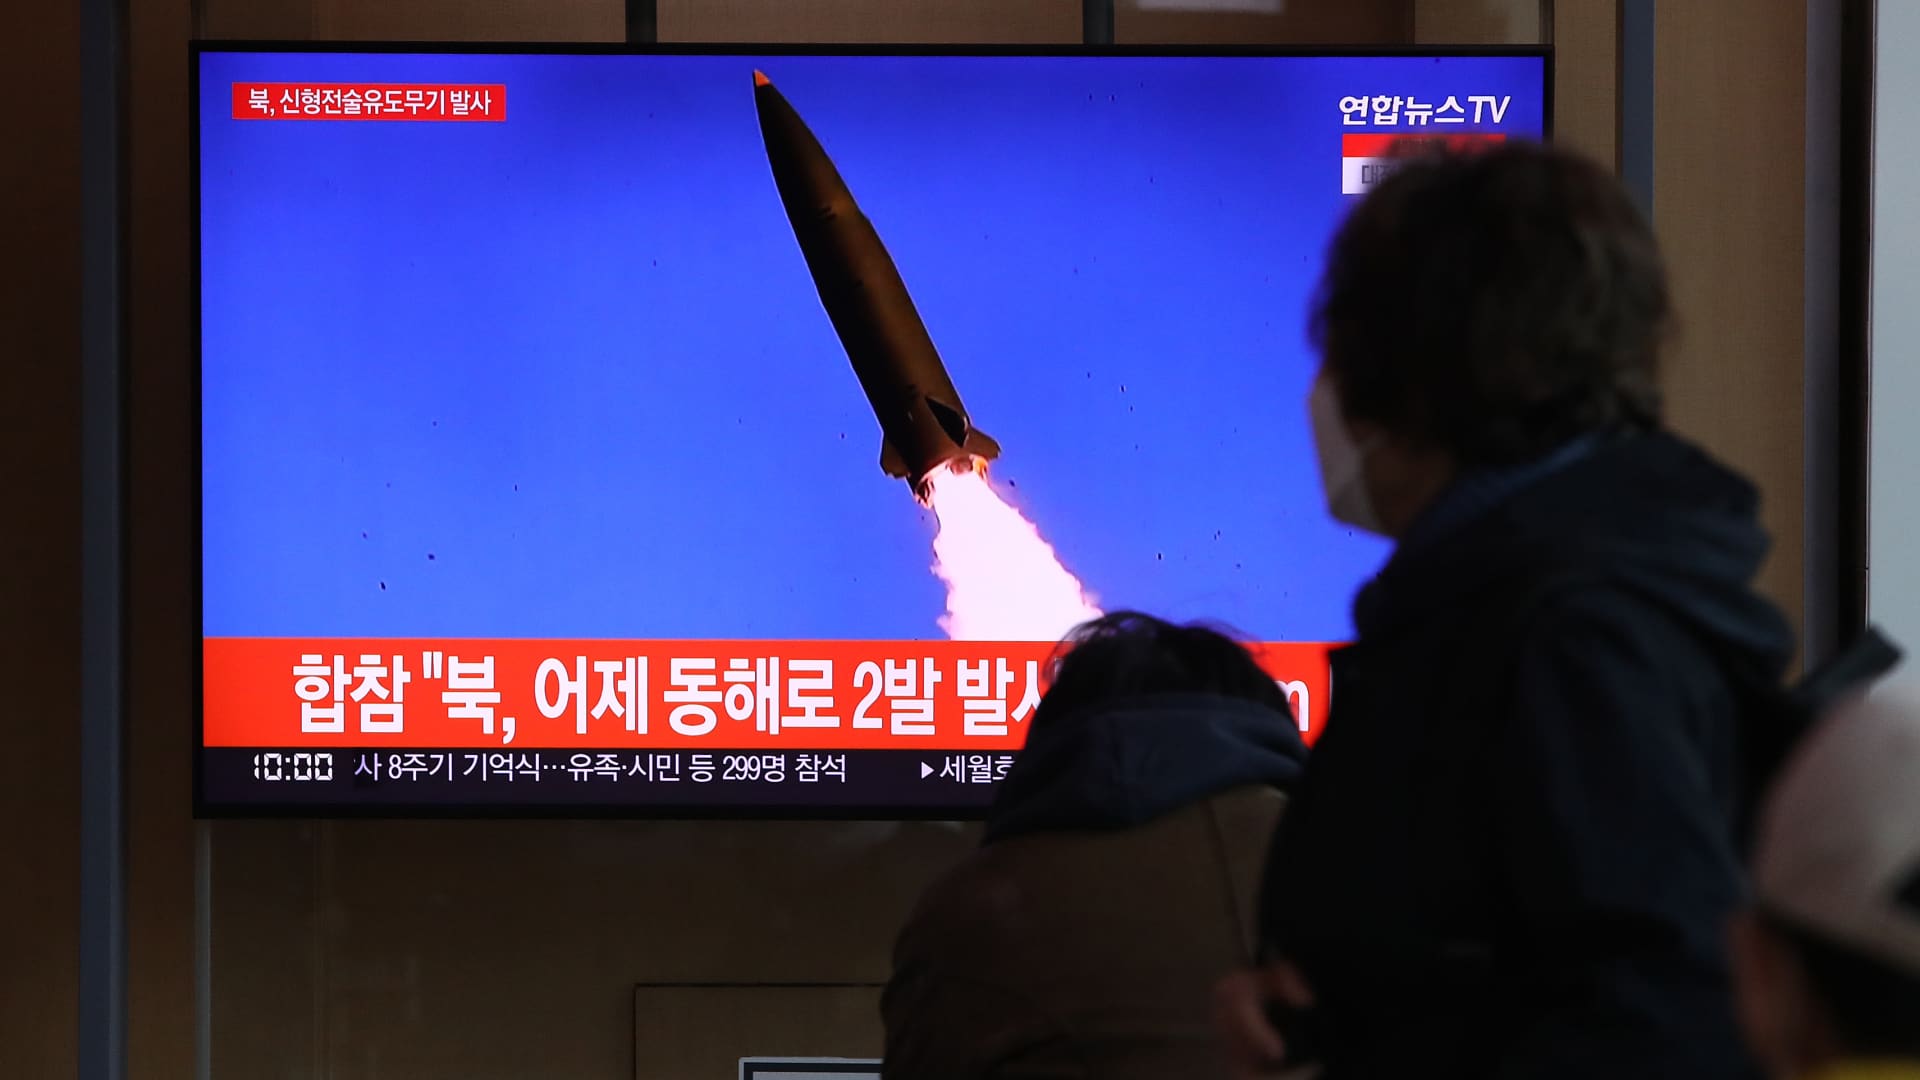 U.S. sanctions 3 people following string of North Korean missile launches